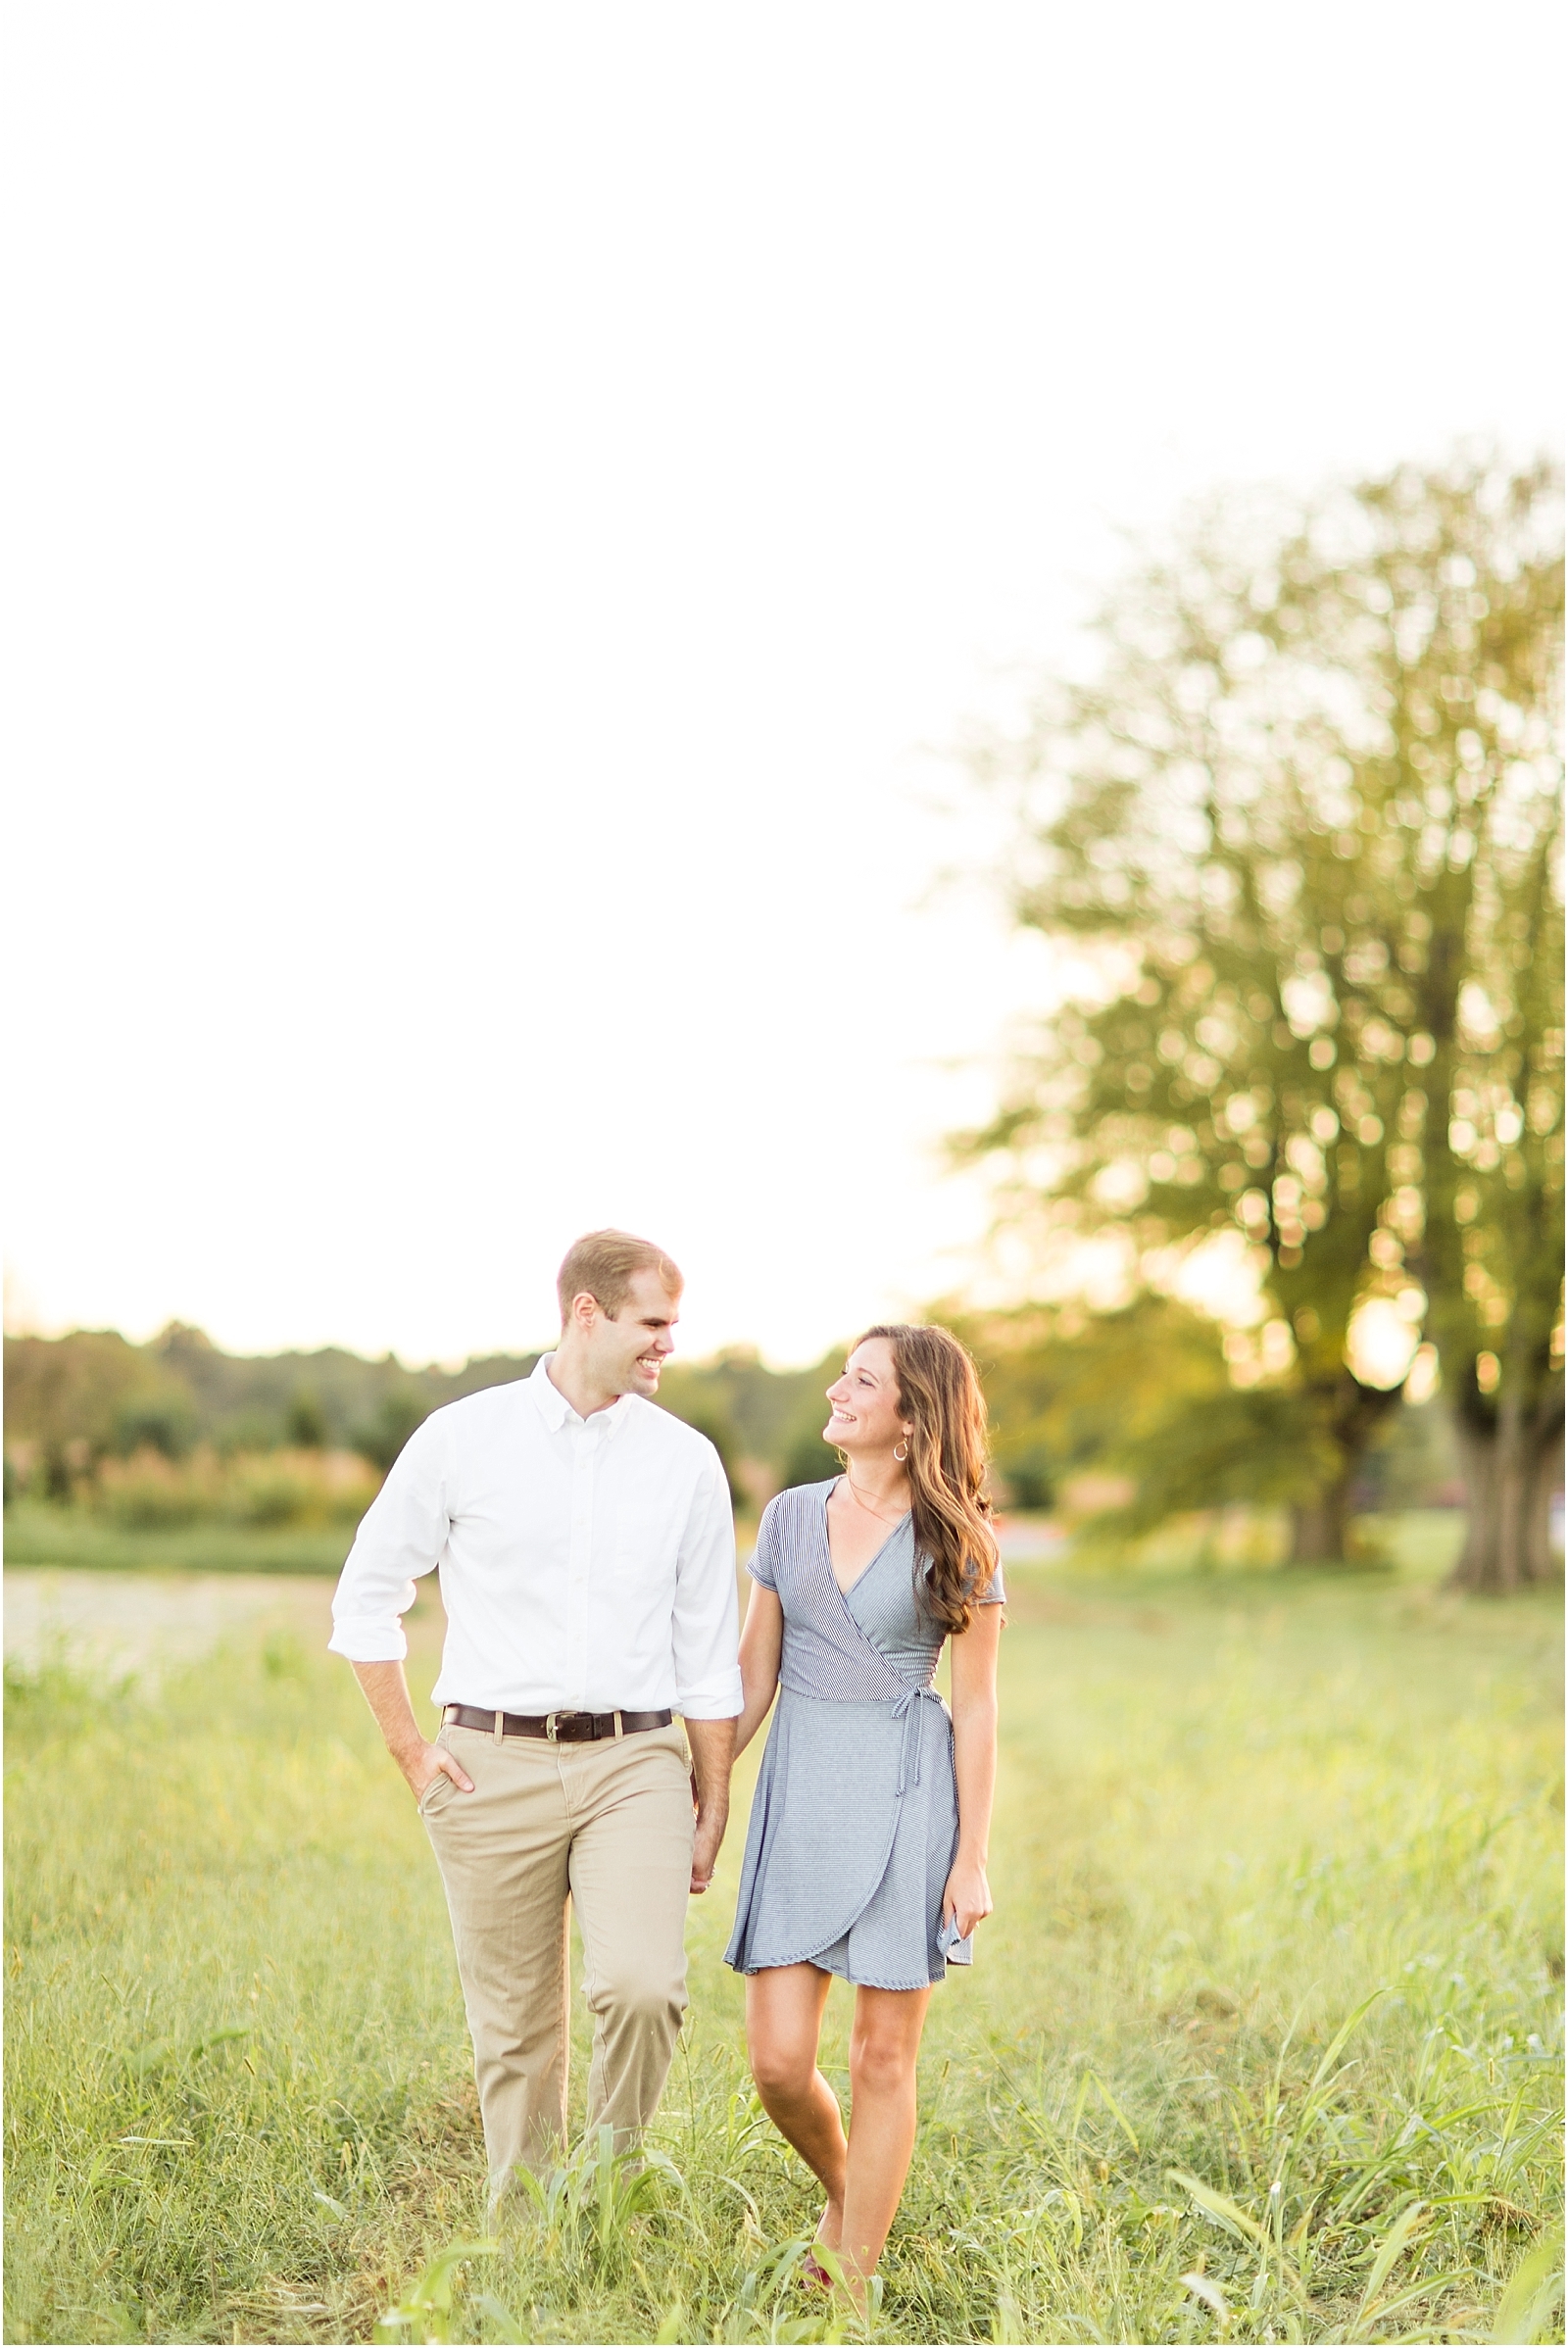 Stacey and Thomas | Engaged0028.jpg